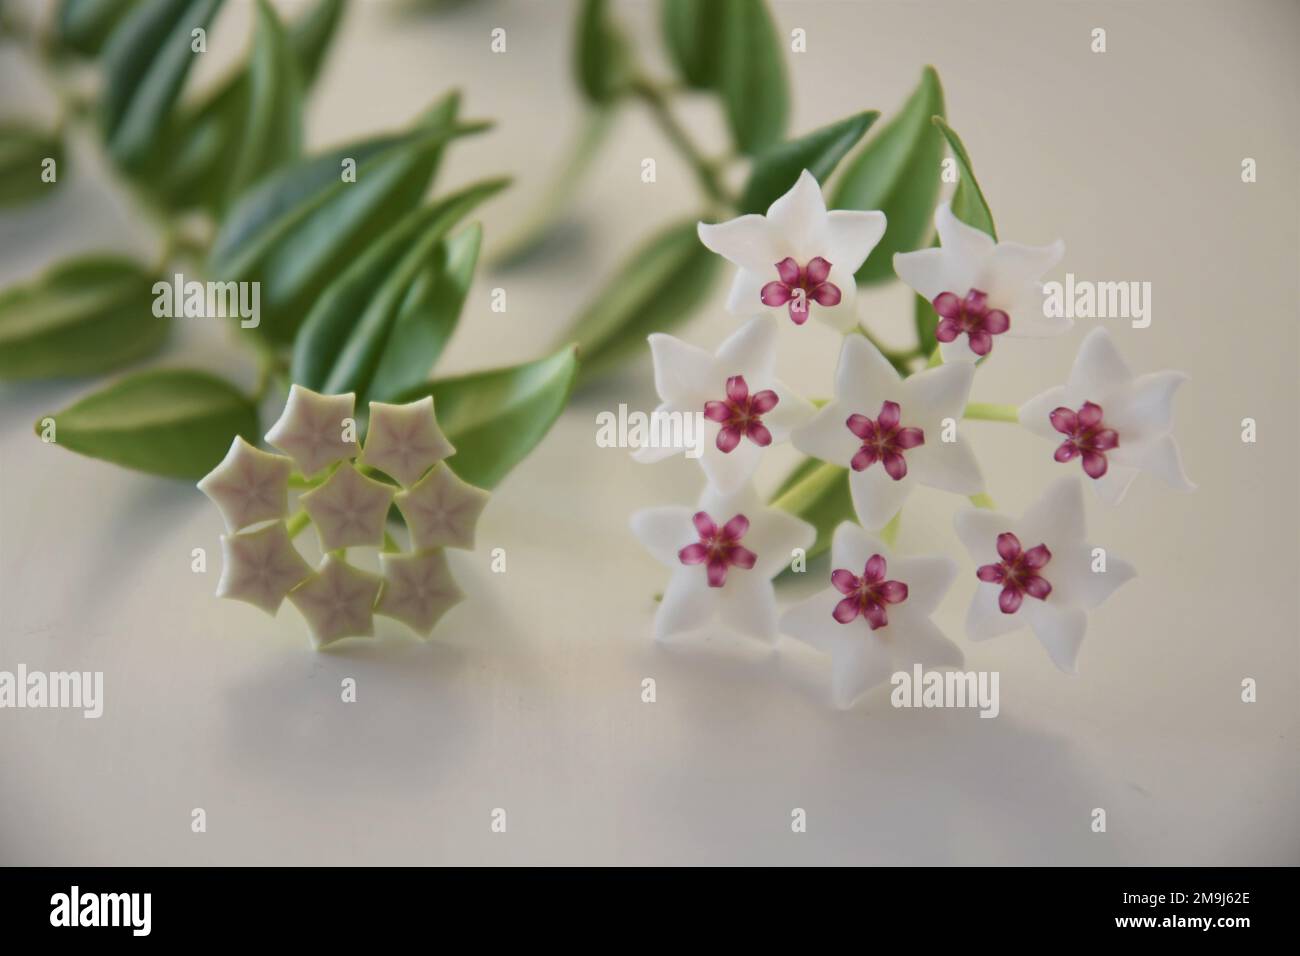 Hoya bella bloom, white and pink flower, with a bud, on a green vine. Close up on a white background. Stock Photo